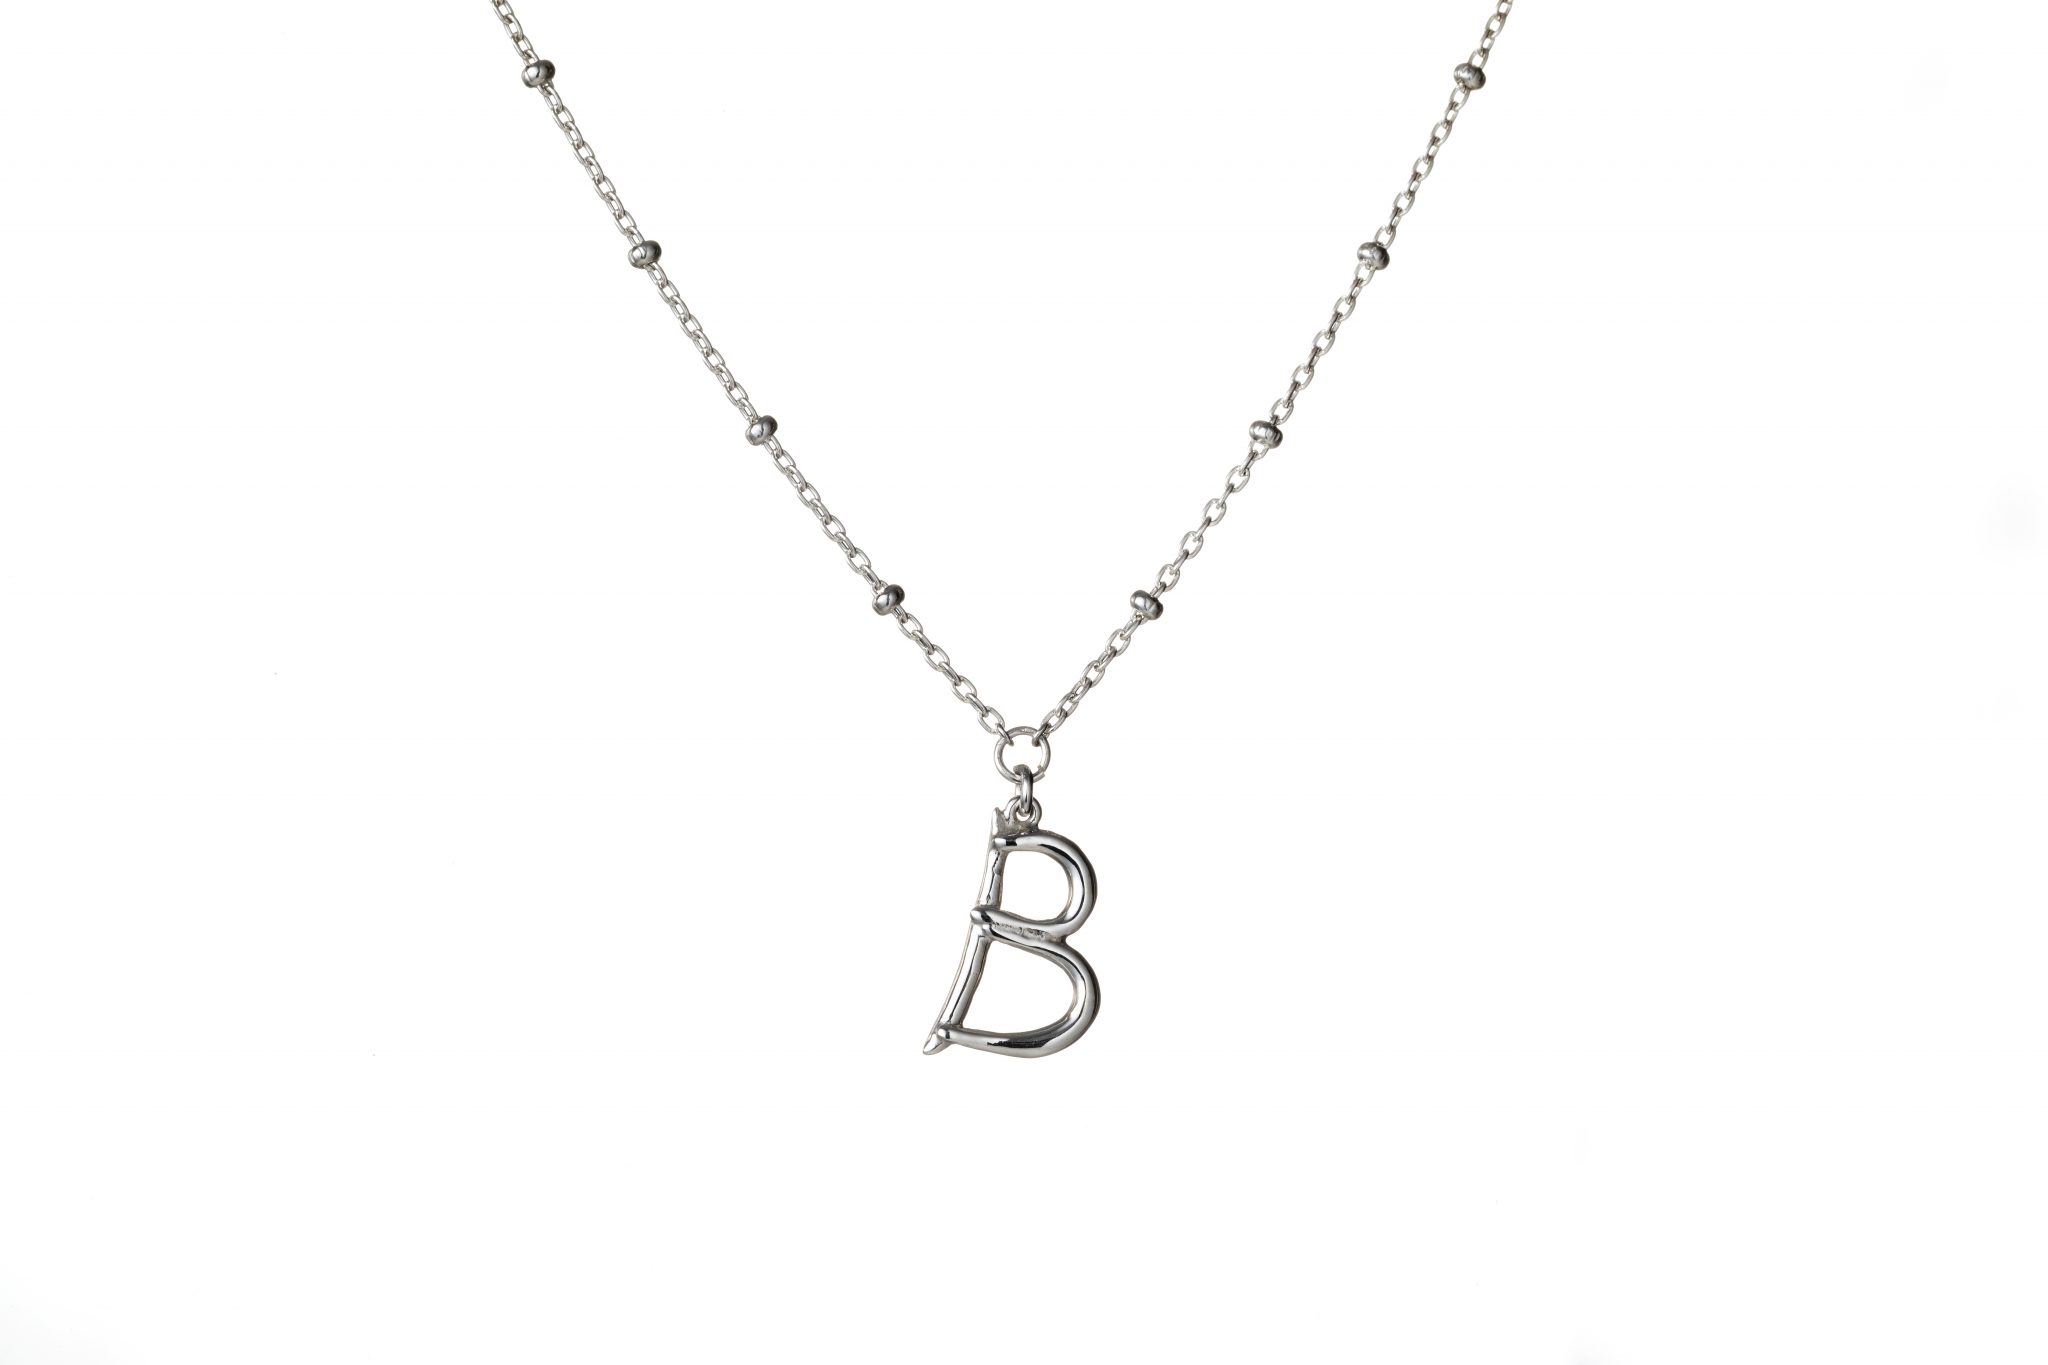 Will Bishop - Handcrafted Jewellery & Personalised Gifts